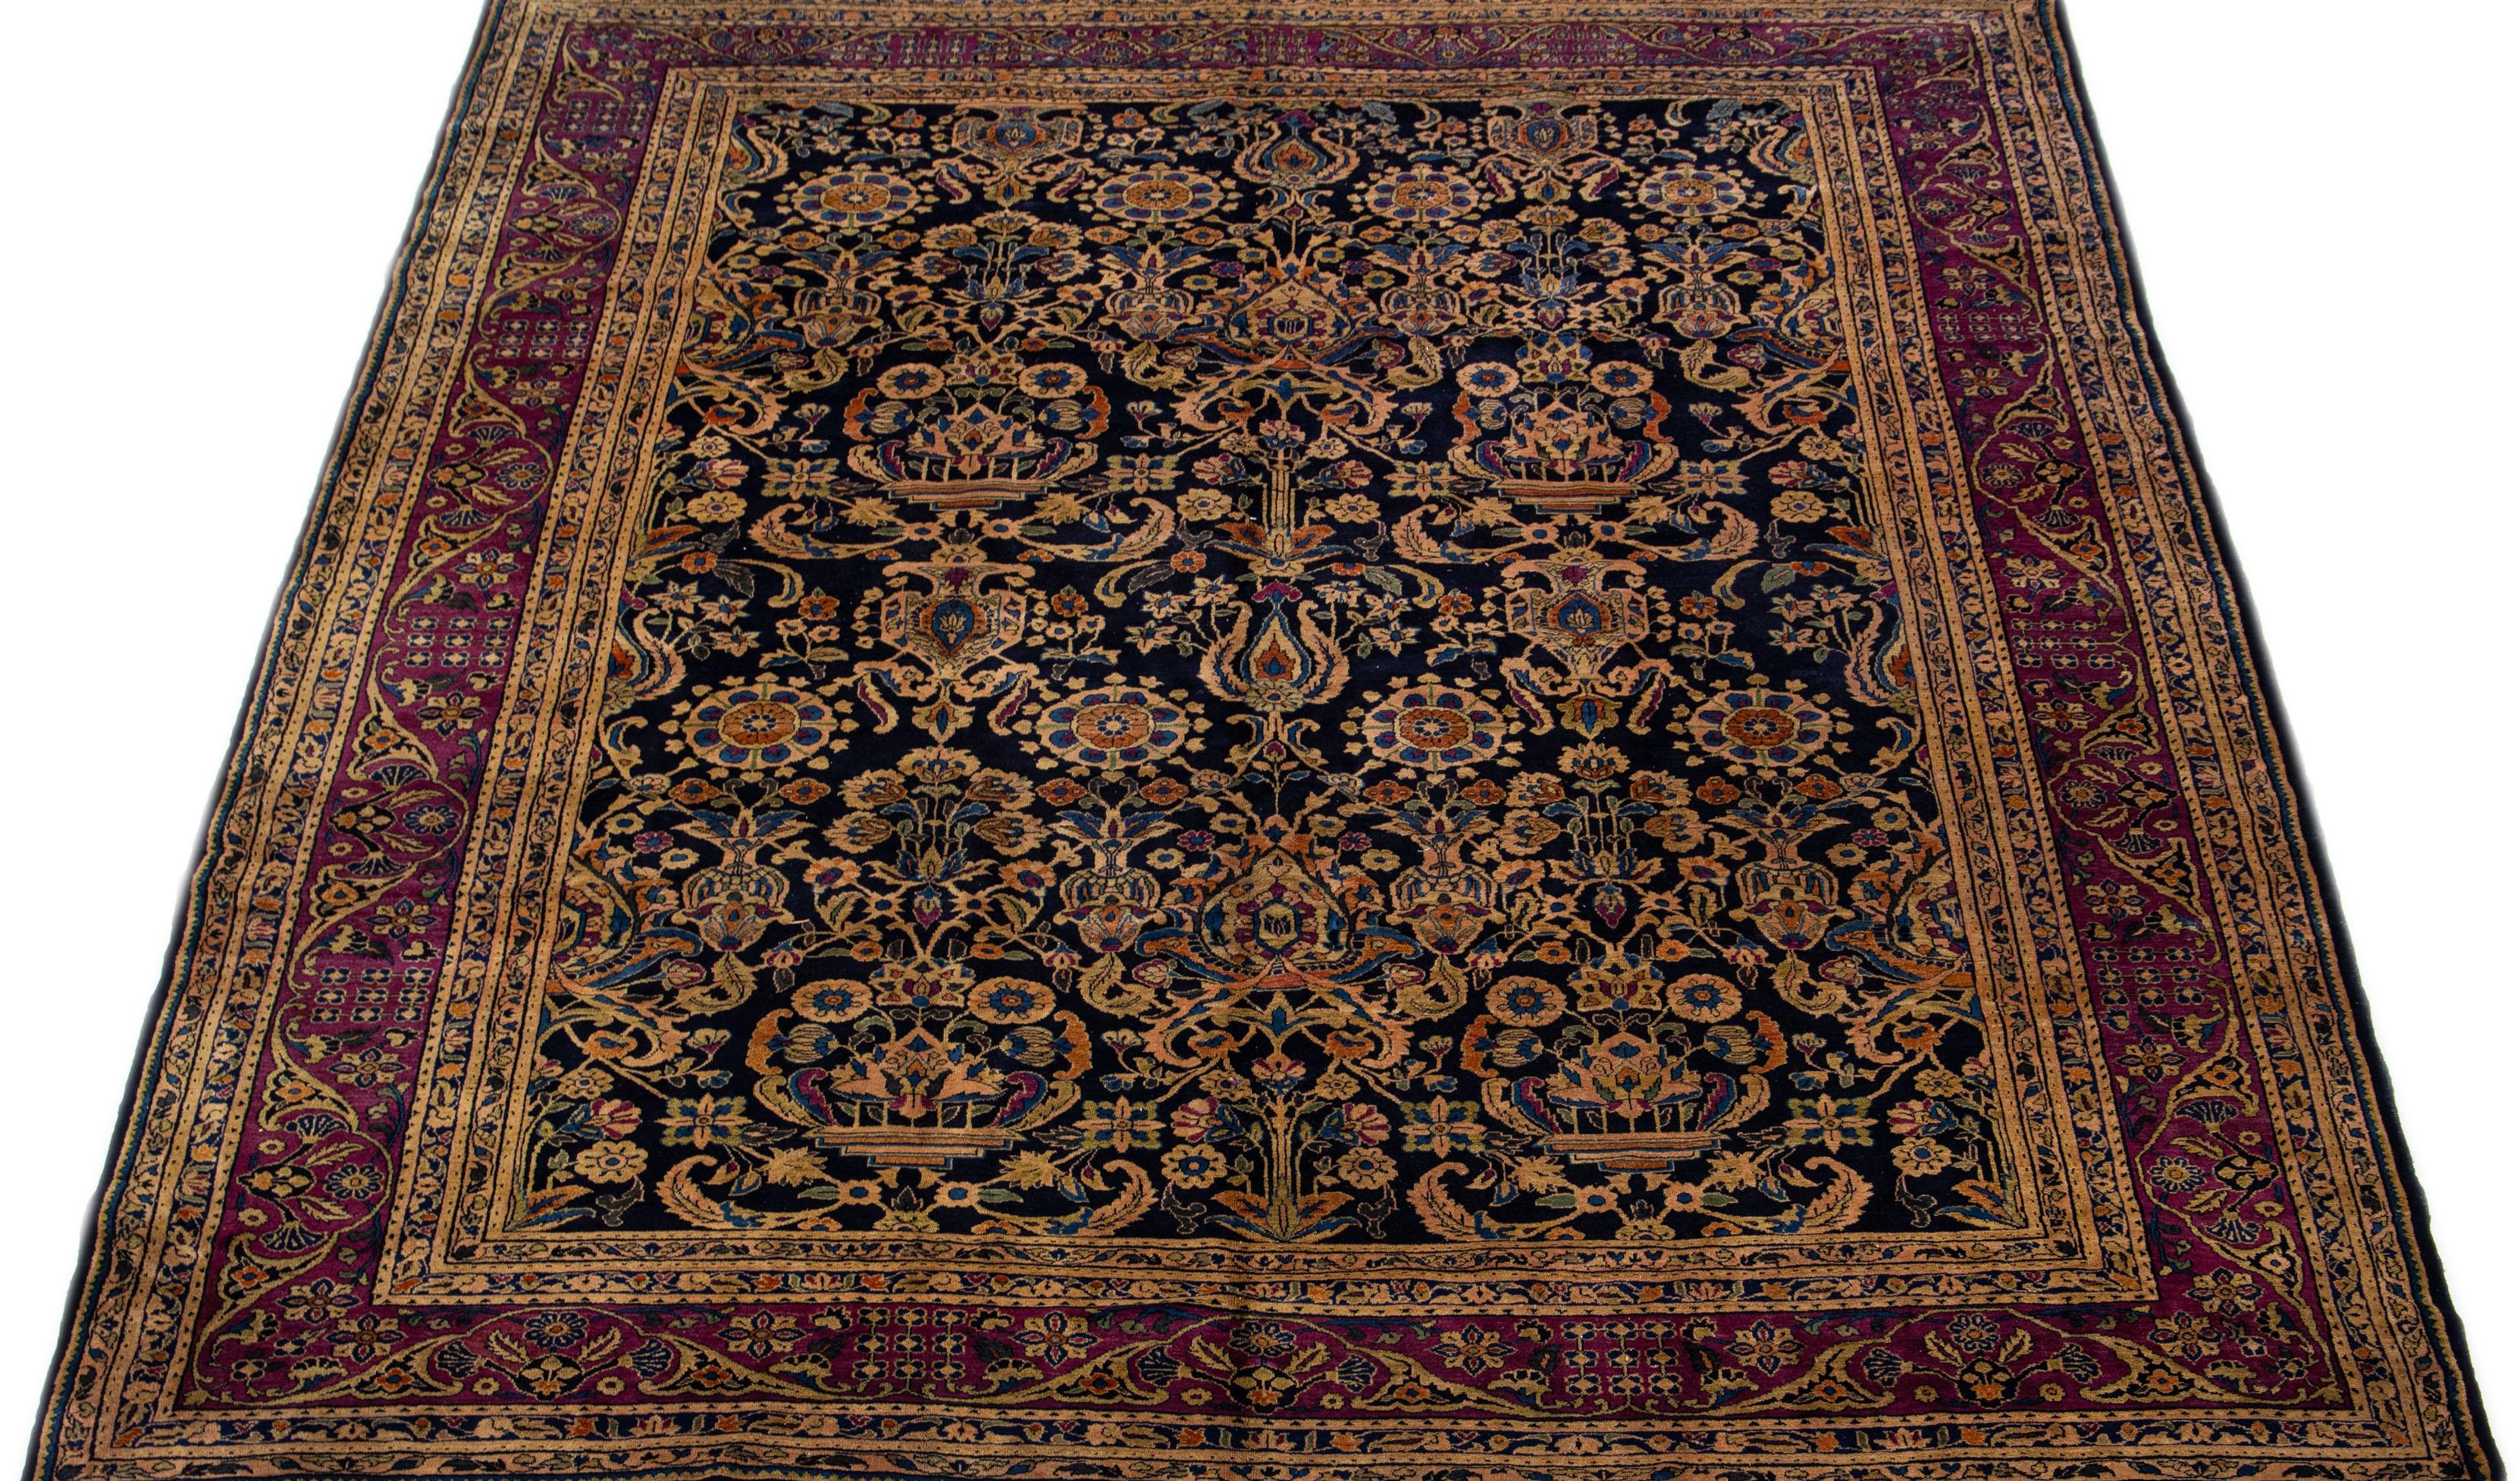 Beautiful Antique Farahan hand-knotted wool rug with a dark blue field. This Persian rug has a purple-designed frame with multi-color accents on a Classic floral design.

This rug measure: 9'2